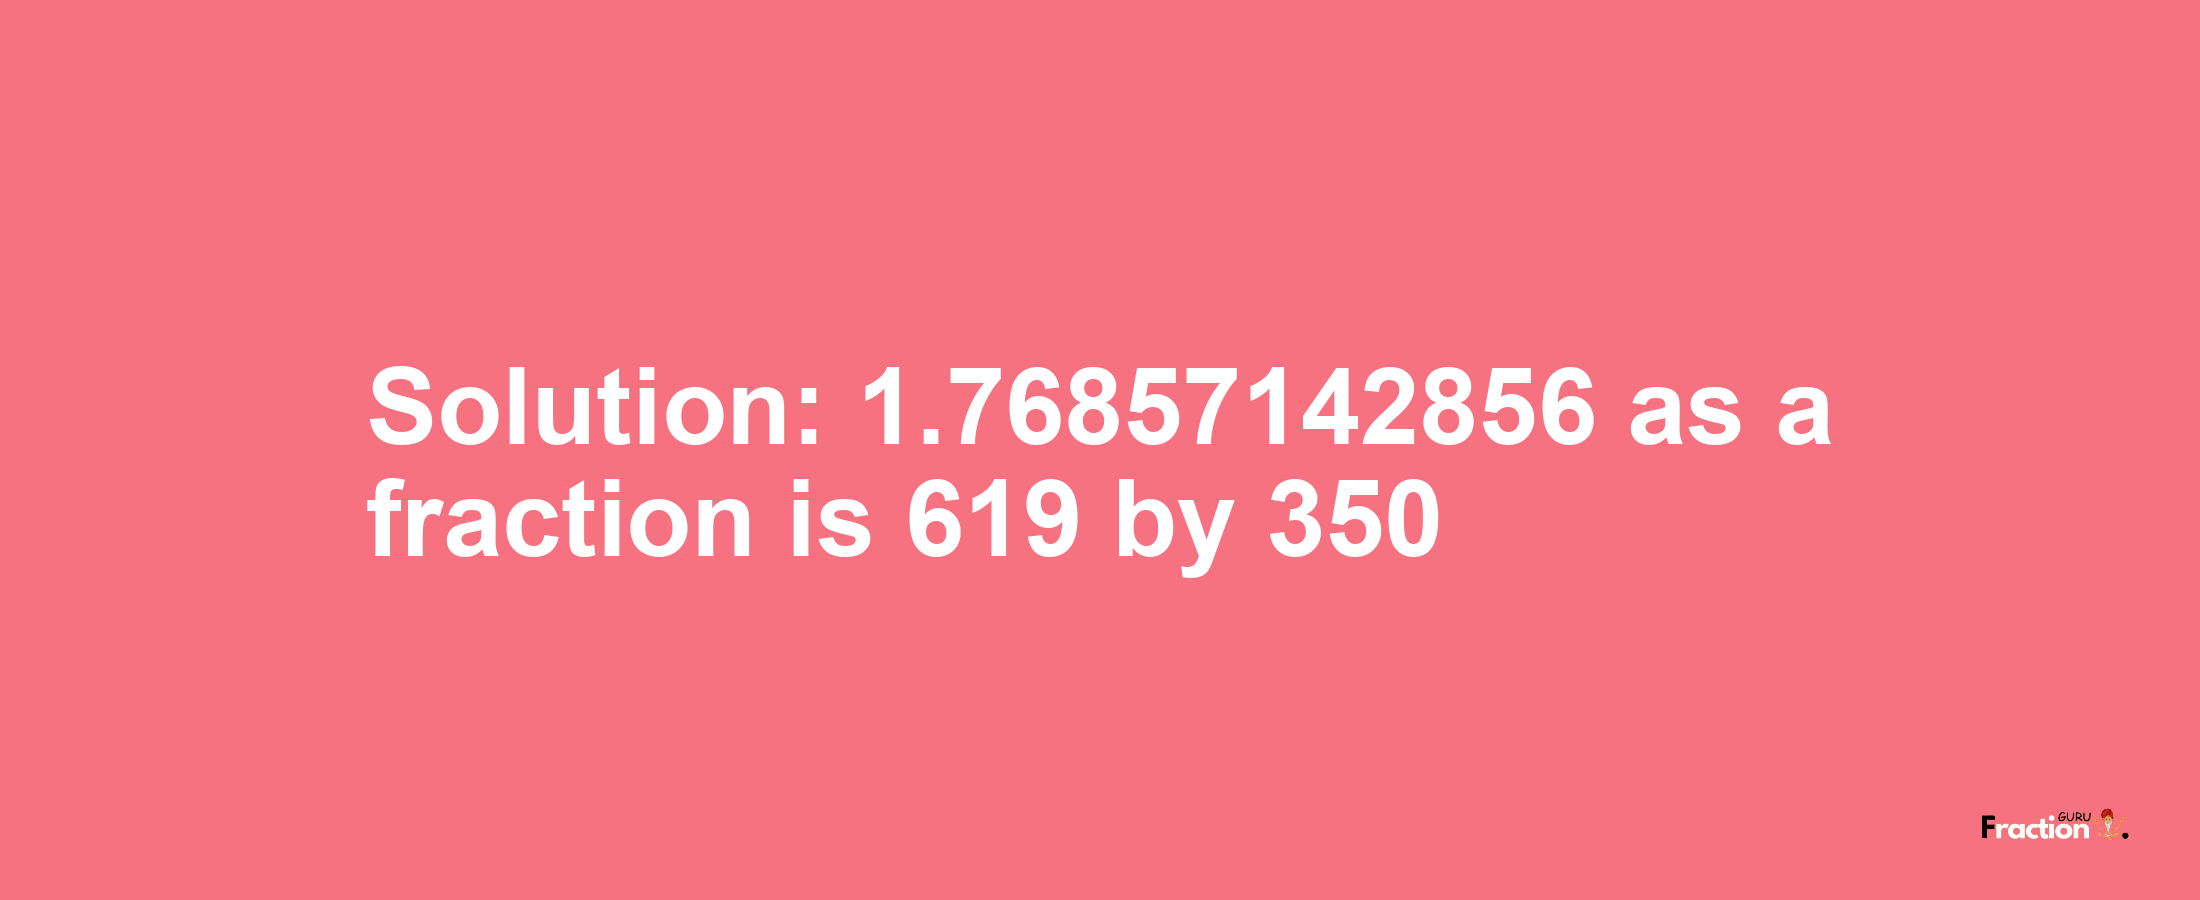 Solution:1.76857142856 as a fraction is 619/350